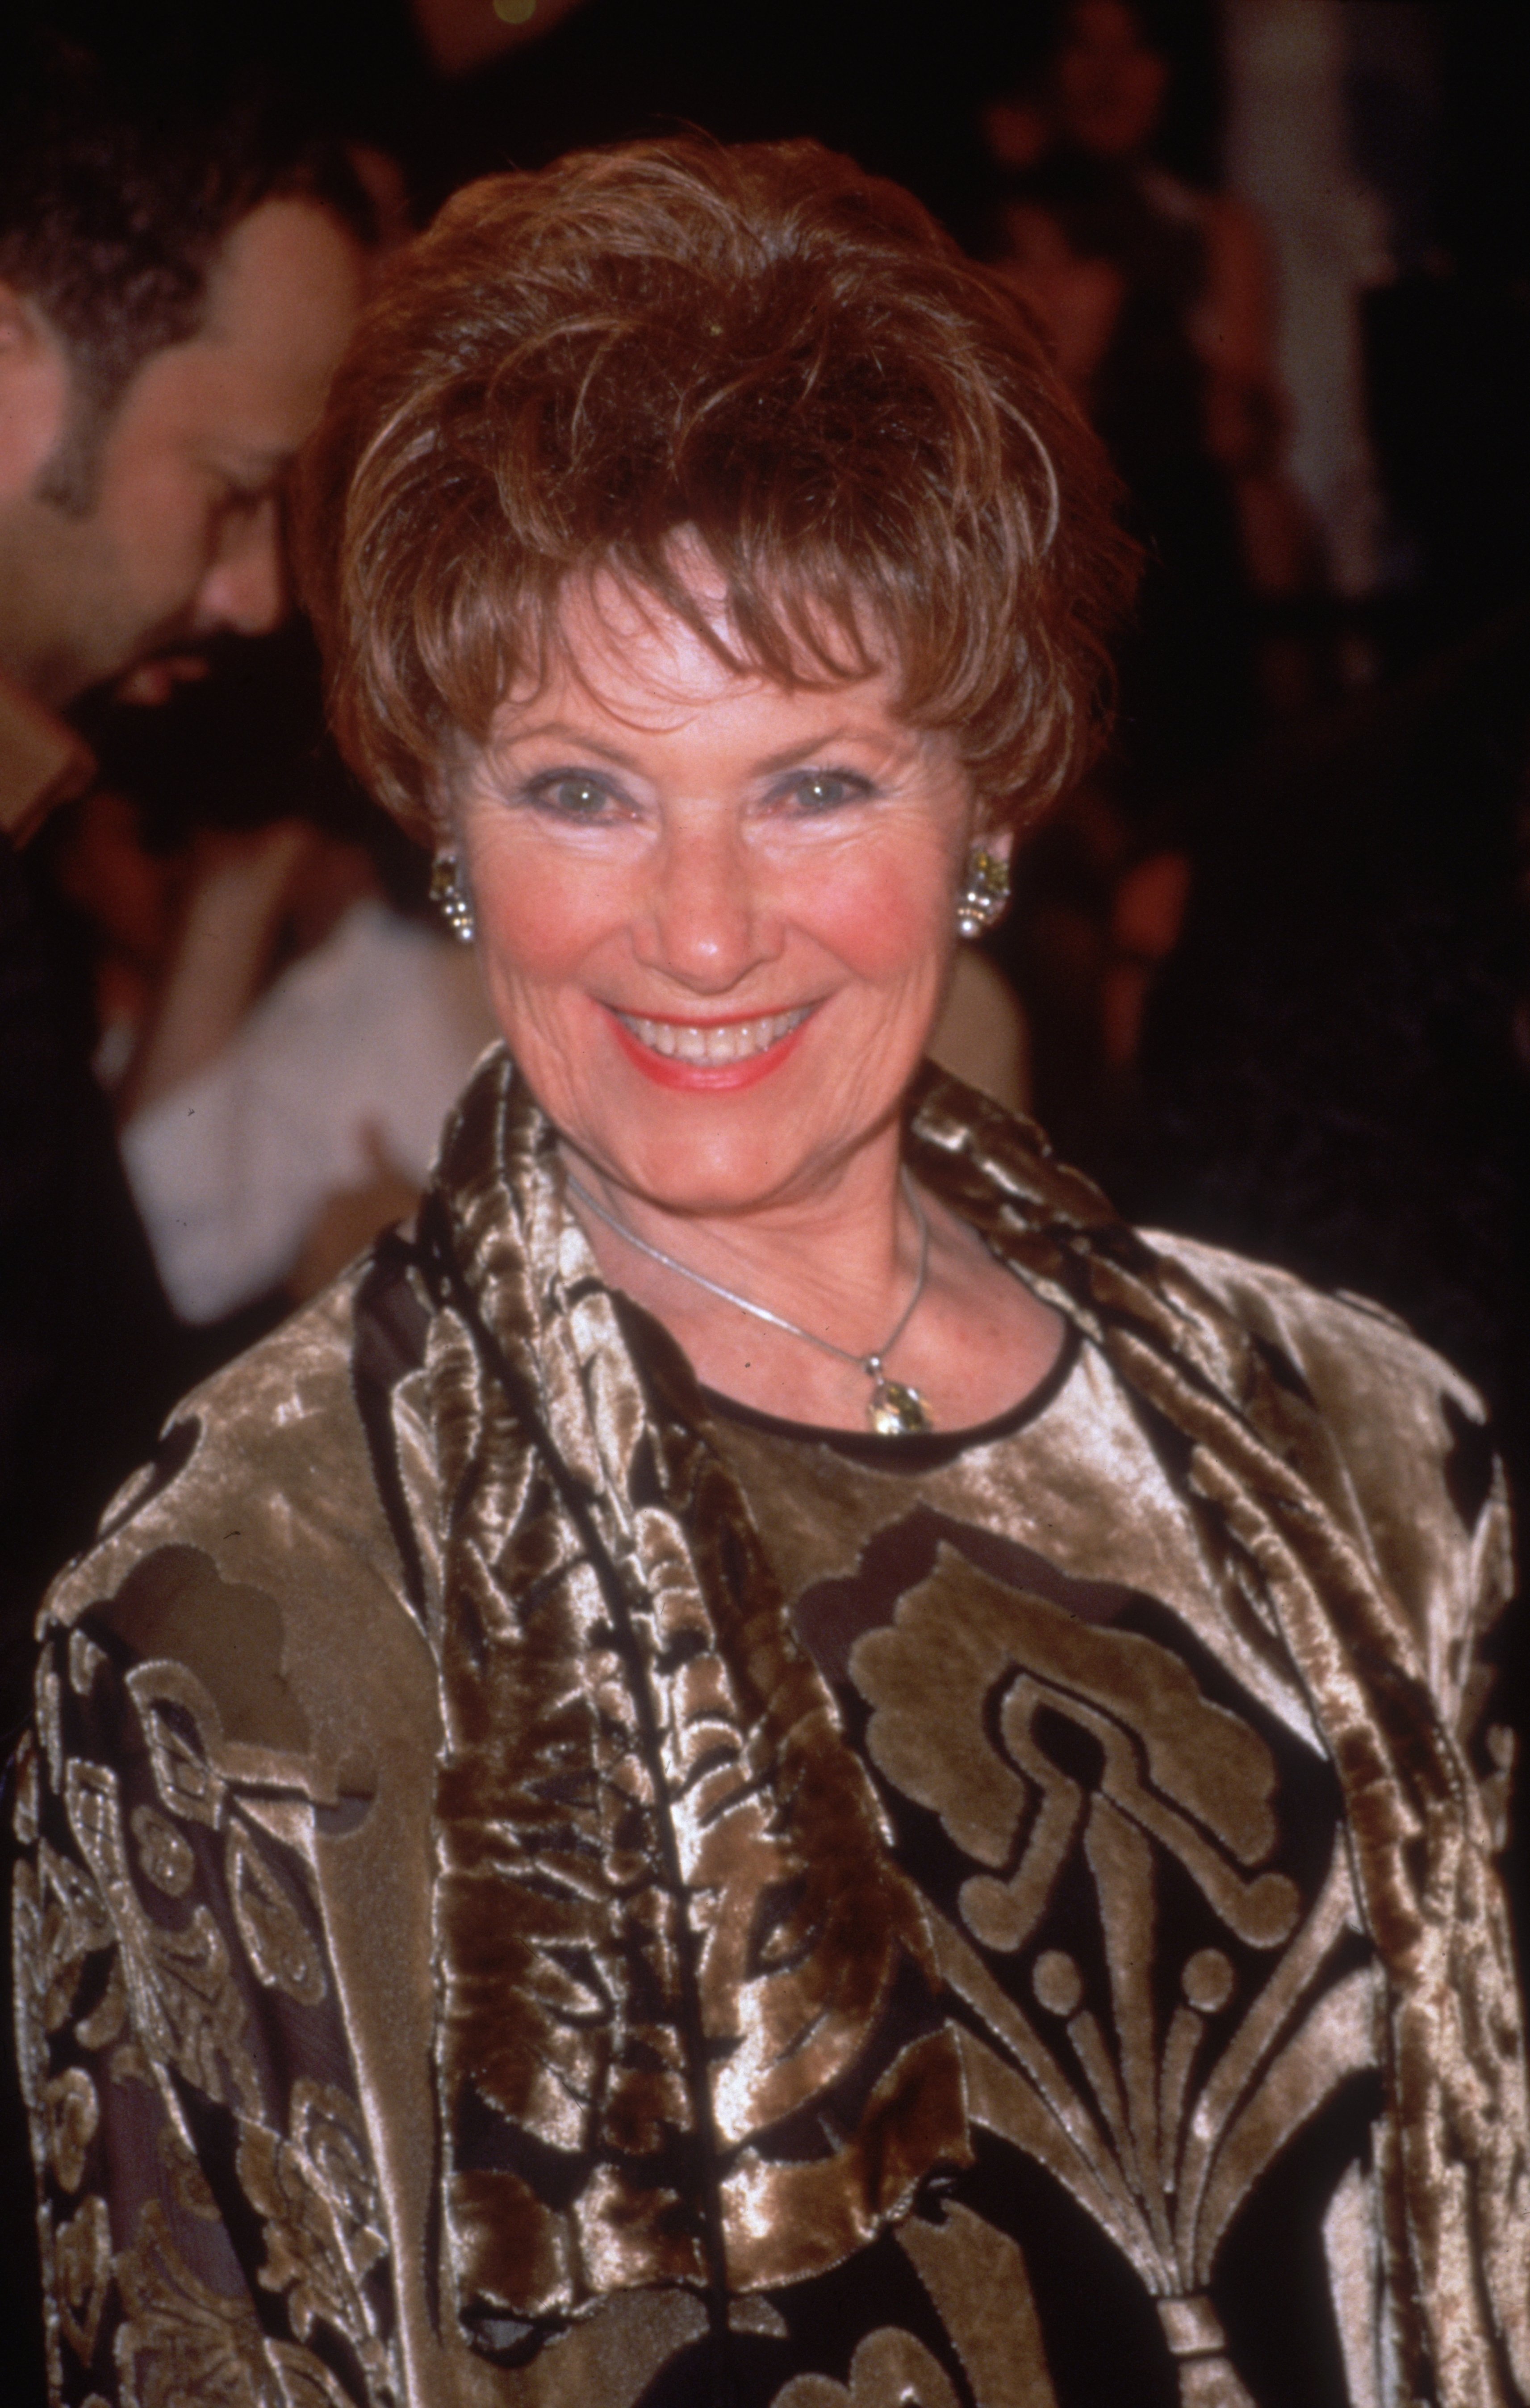 Marion Ross attends the American Comedy Awards, at the Shrine Exposition Center, Los Angeles, California in 2000. | Source: Getty Images